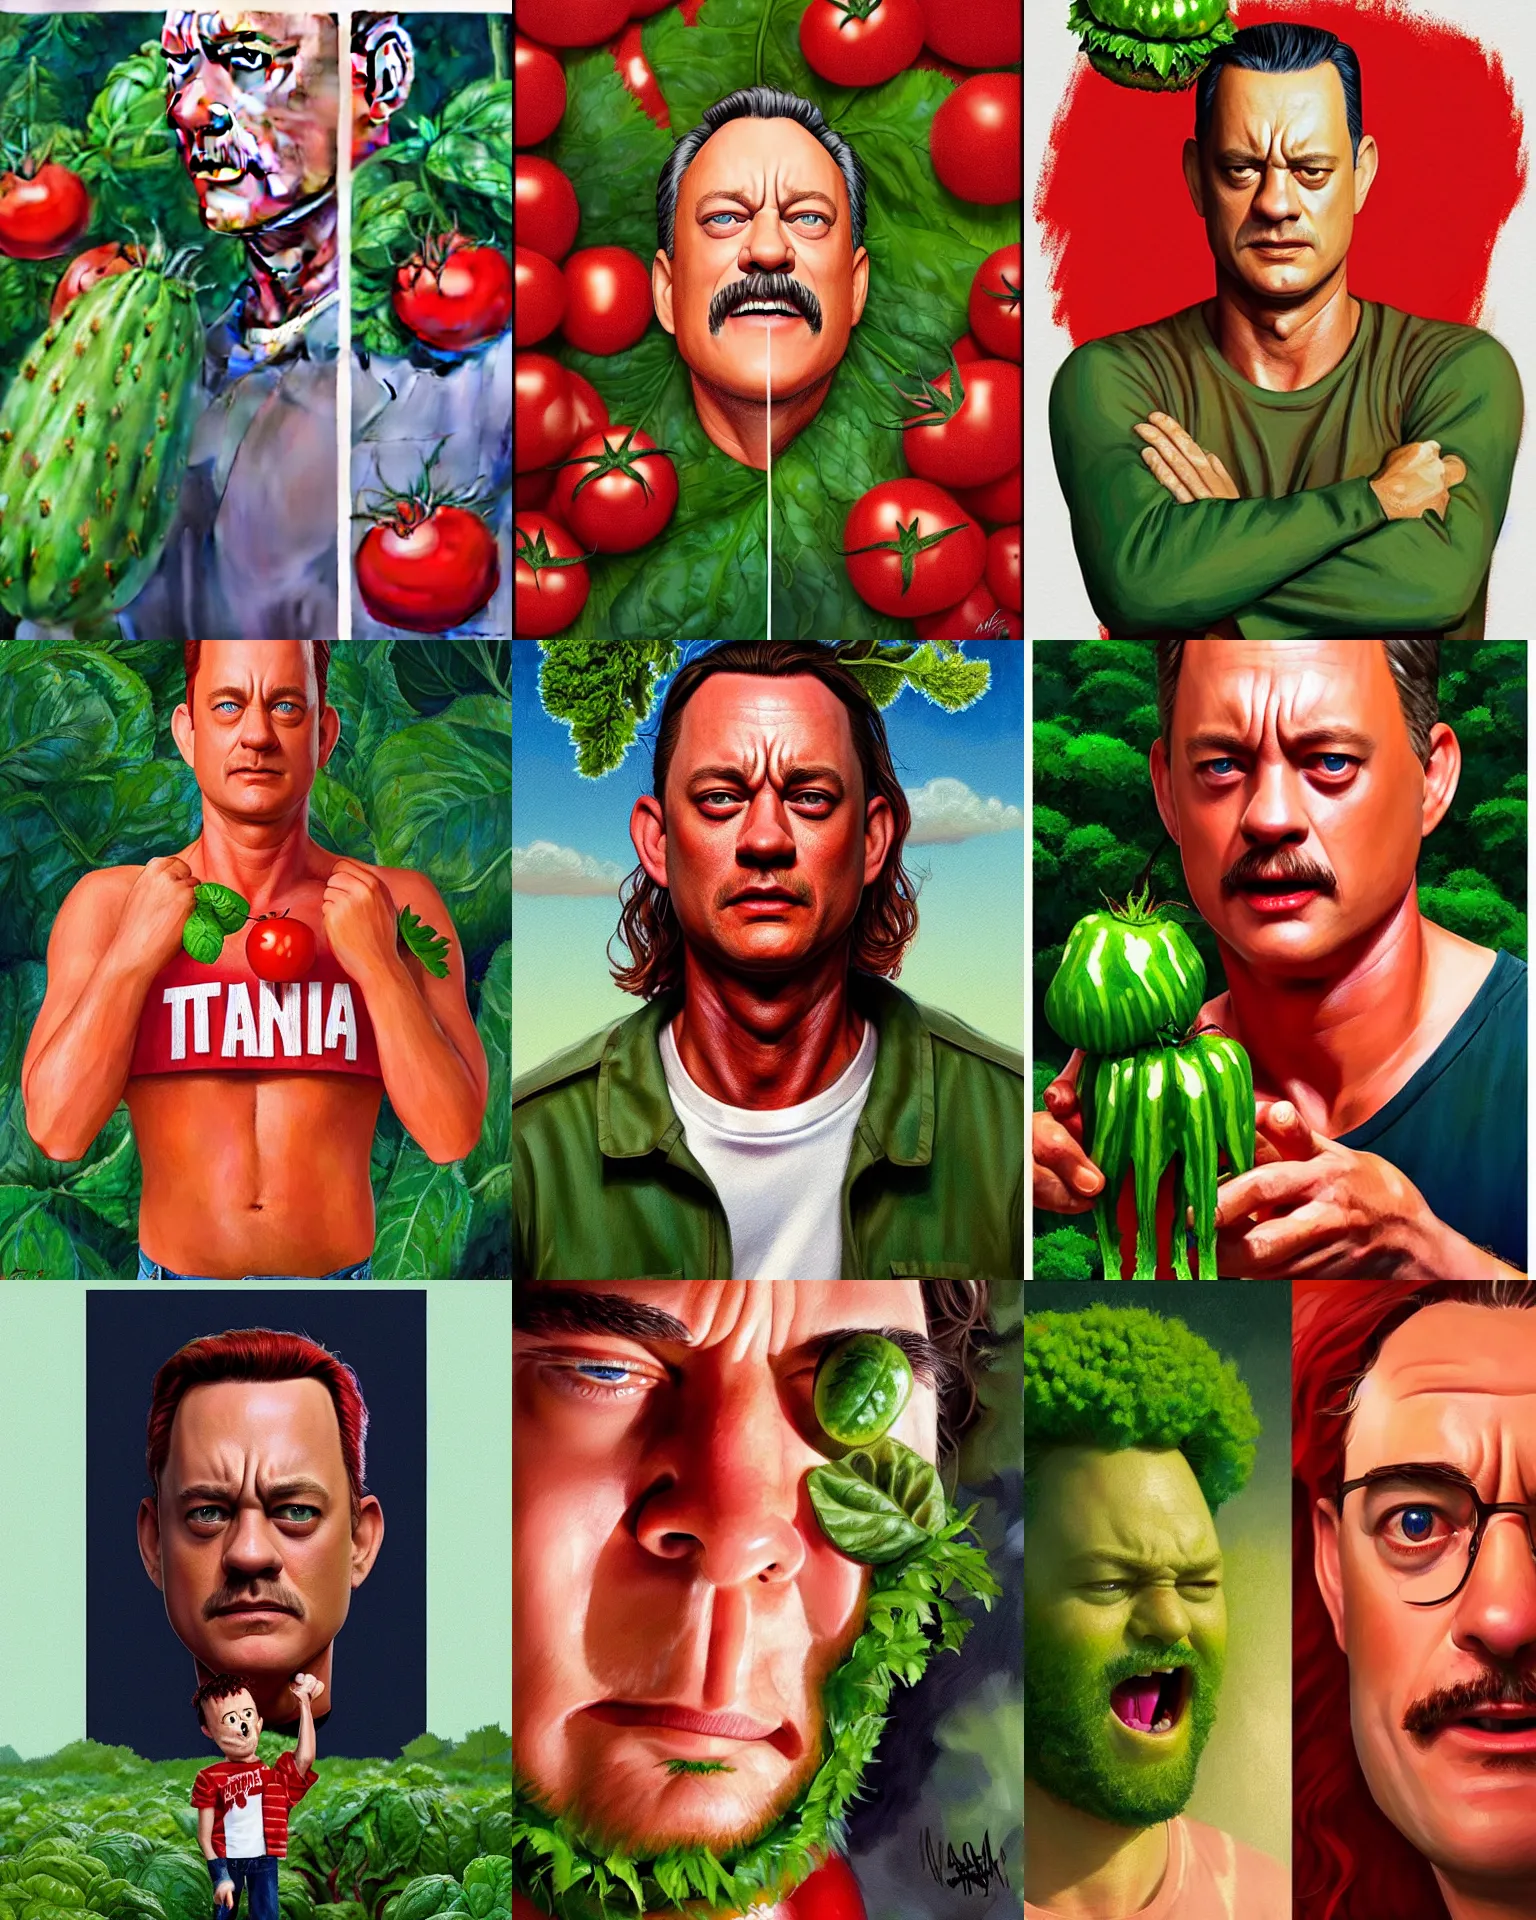 Prompt: forest gump starring tom hank sas a tomato, his skin is red with leafy green hair, pickle rick animation character, dramatic lighting, tom hanks tomato face, shaded lighting poster by magali villeneuve, artgerm, jeremy lipkin and michael garmash, rob rey and kentaro miura style